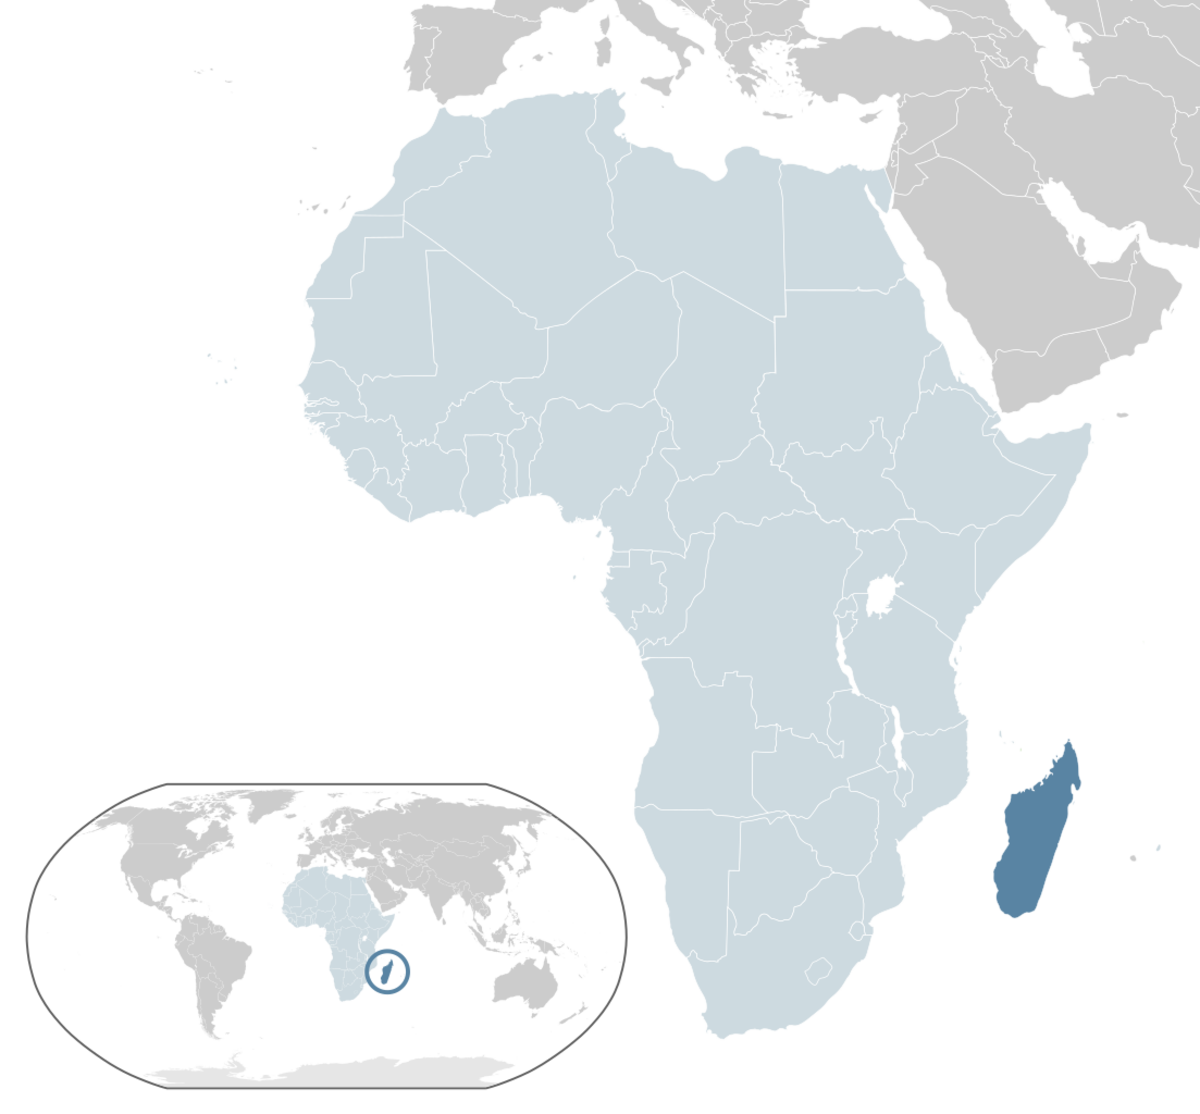 Madagascar is located in the Indian Ocean east of Mozambique.